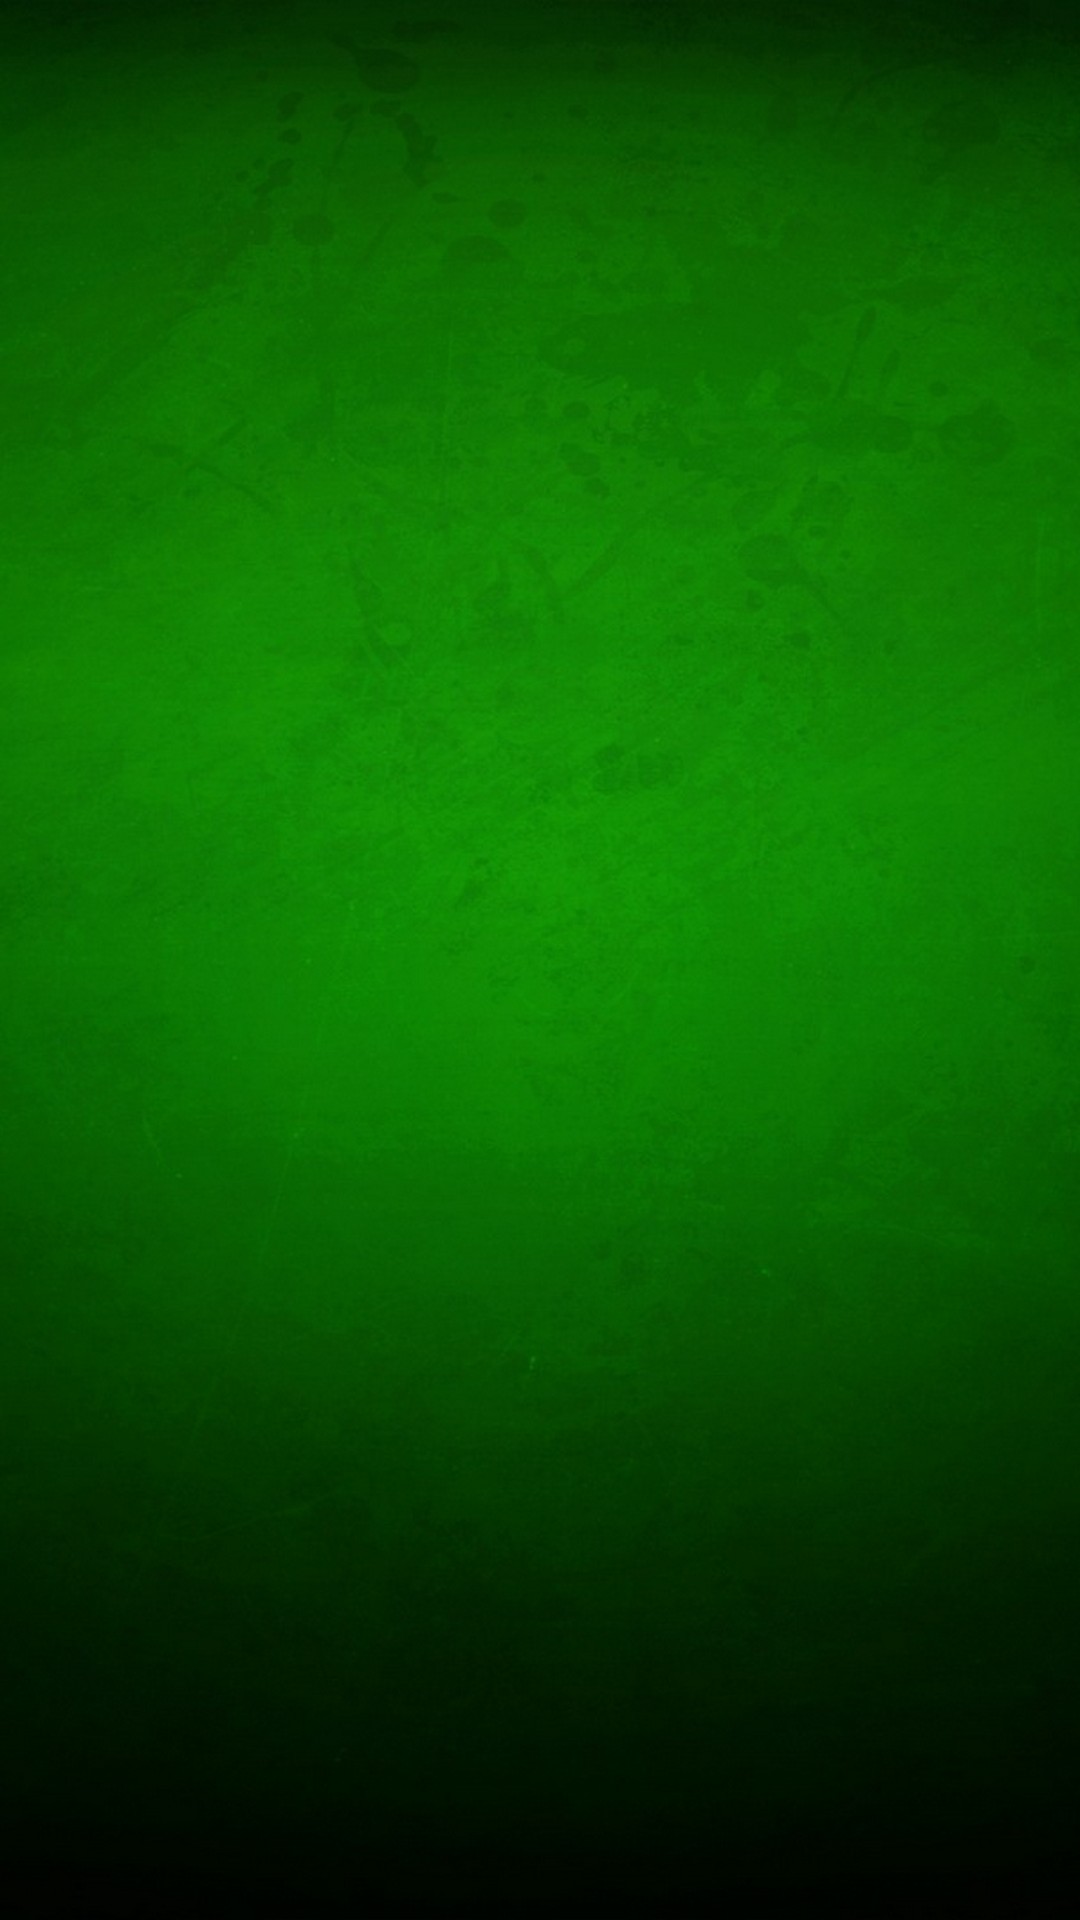 Wallpapers Phone Black and Green with image resolution 1080x1920 pixel. You can make this wallpaper for your Android backgrounds, Tablet, Smartphones Screensavers and Mobile Phone Lock Screen